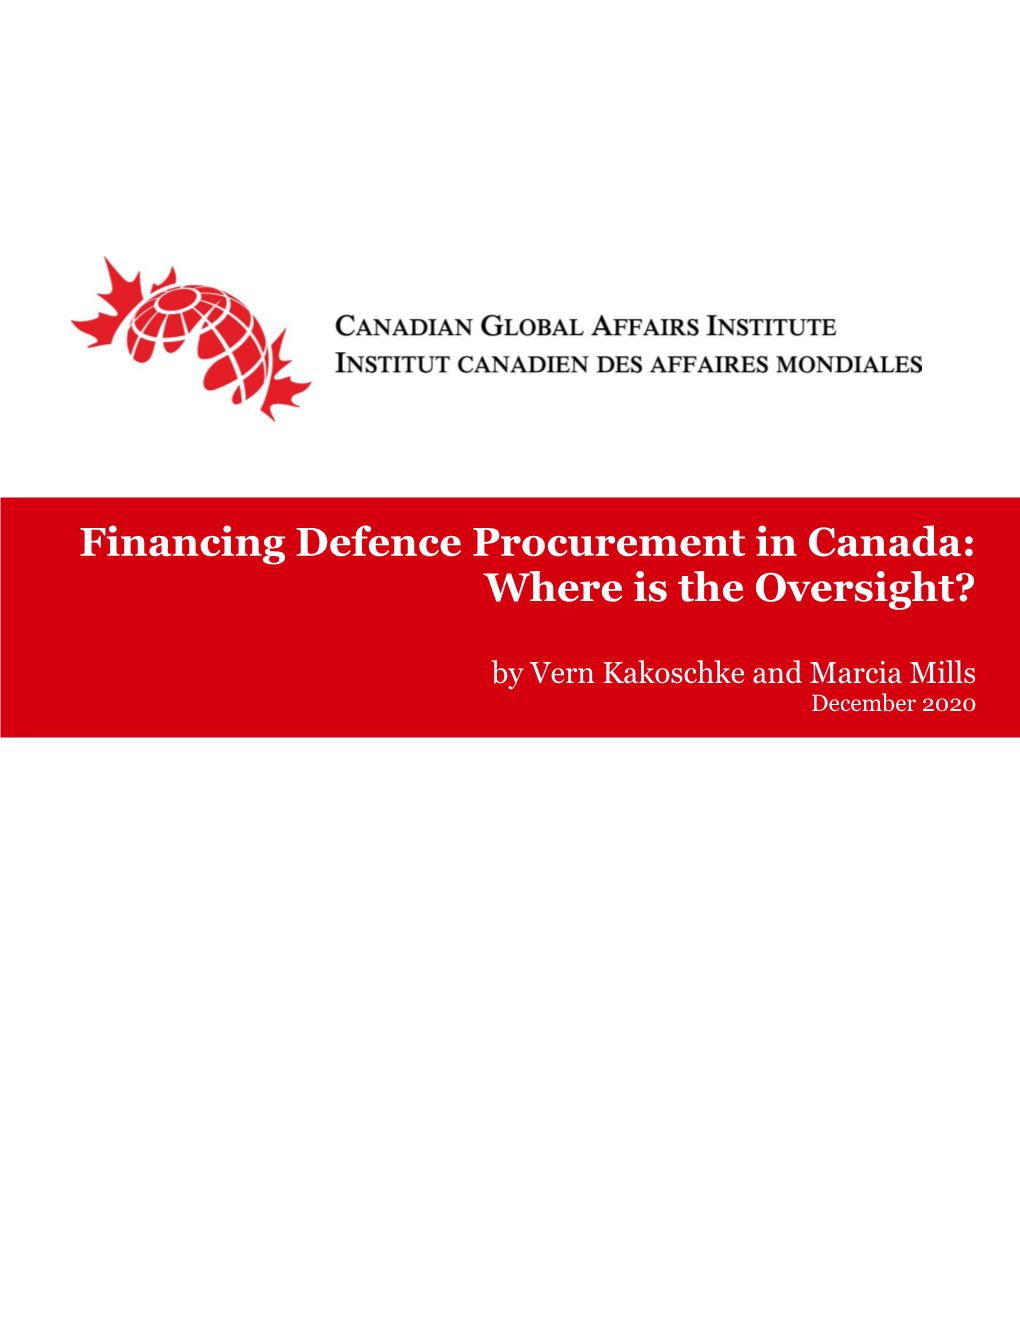 Financing Defence Procurement in Canada: Where Is the Oversight?